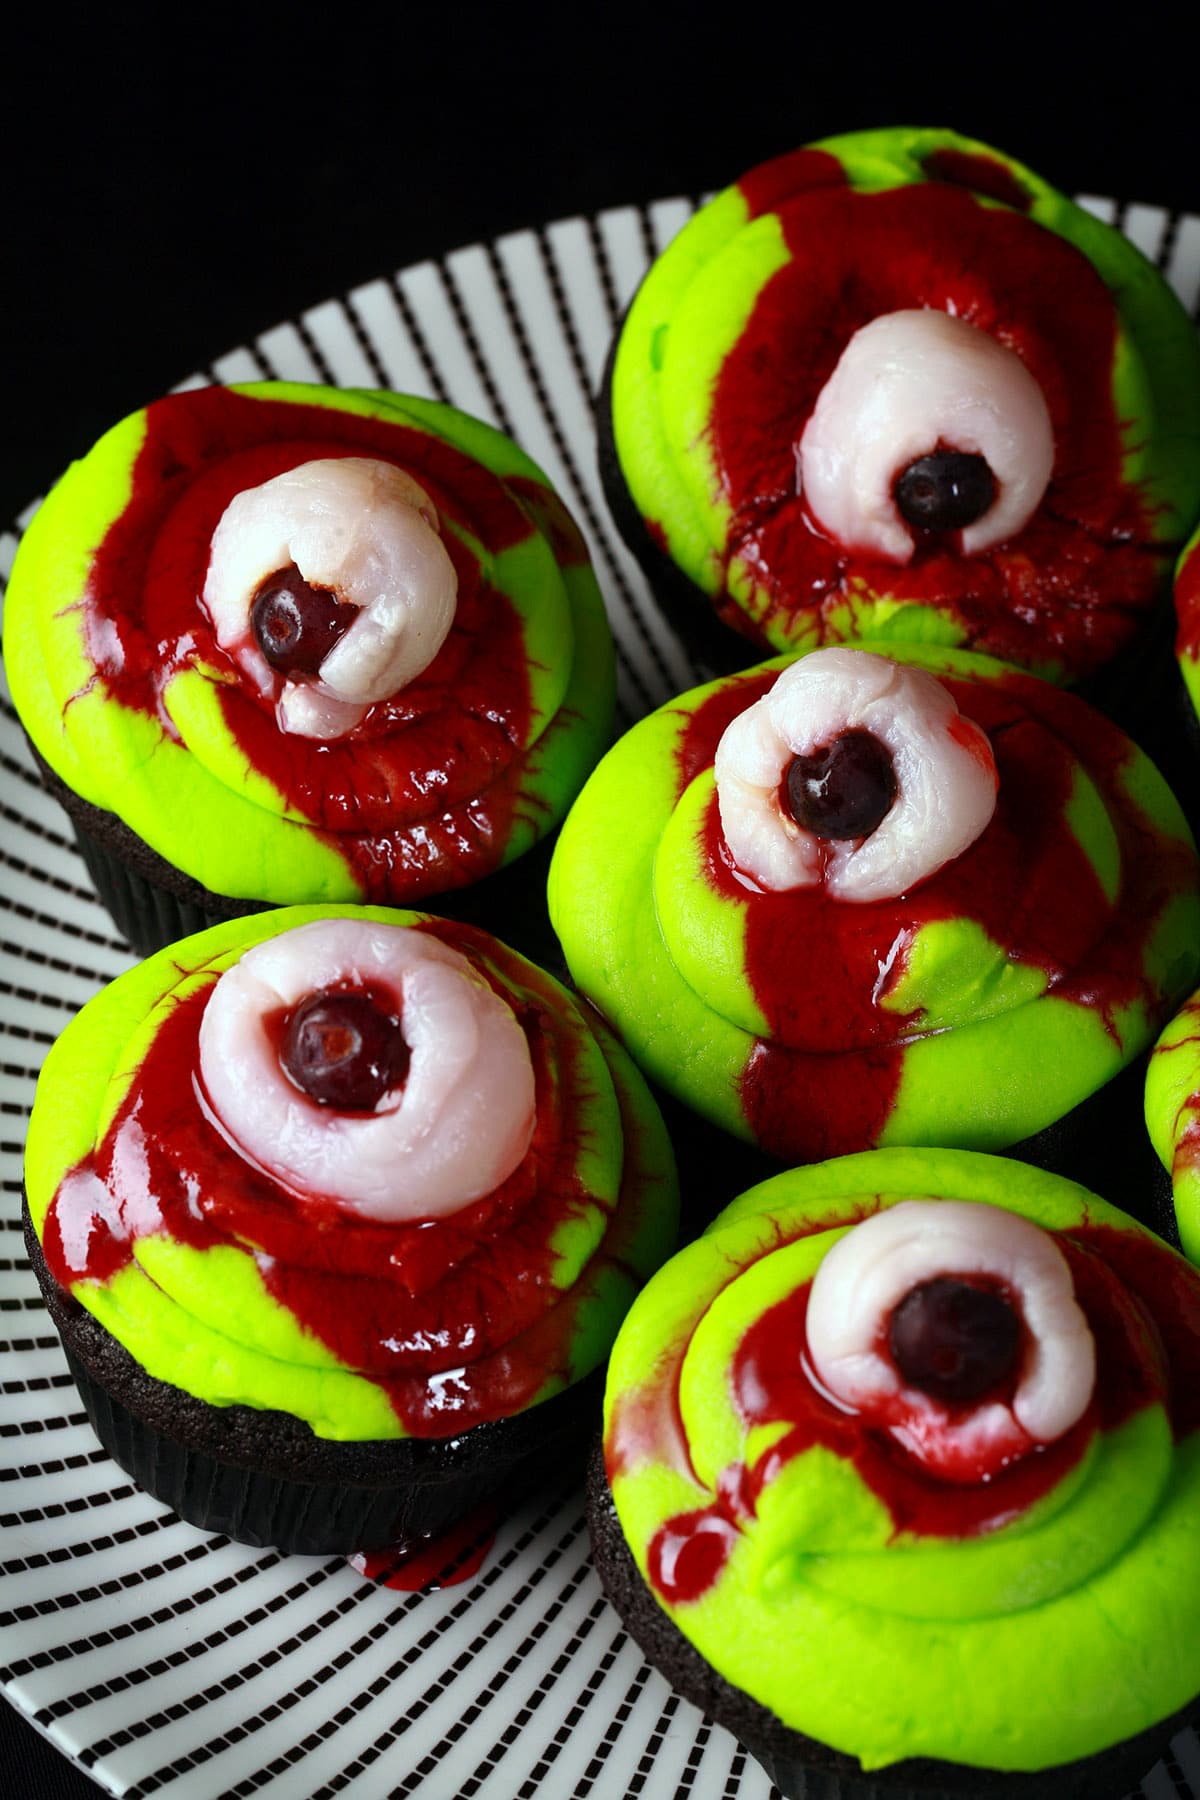 Several lychee bloody eyeball cupcakes on a plate.